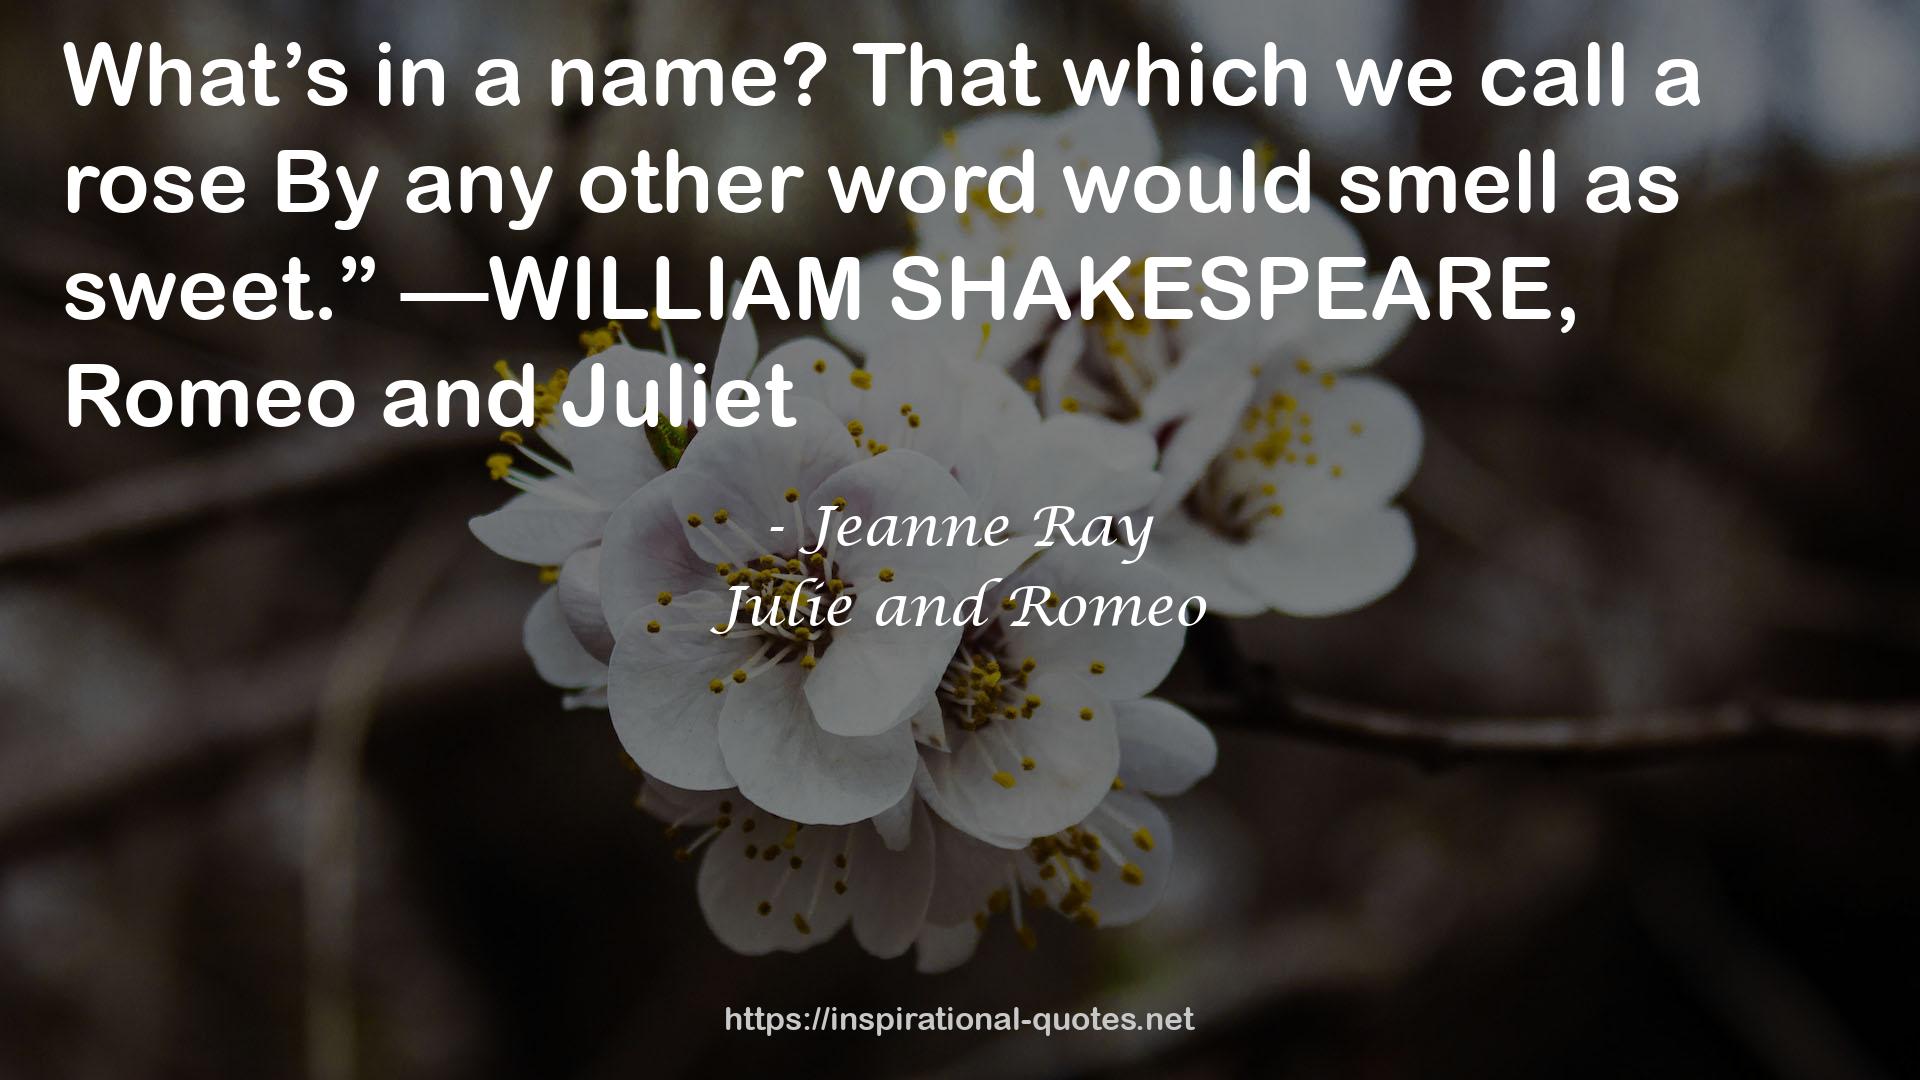 Julie and Romeo QUOTES